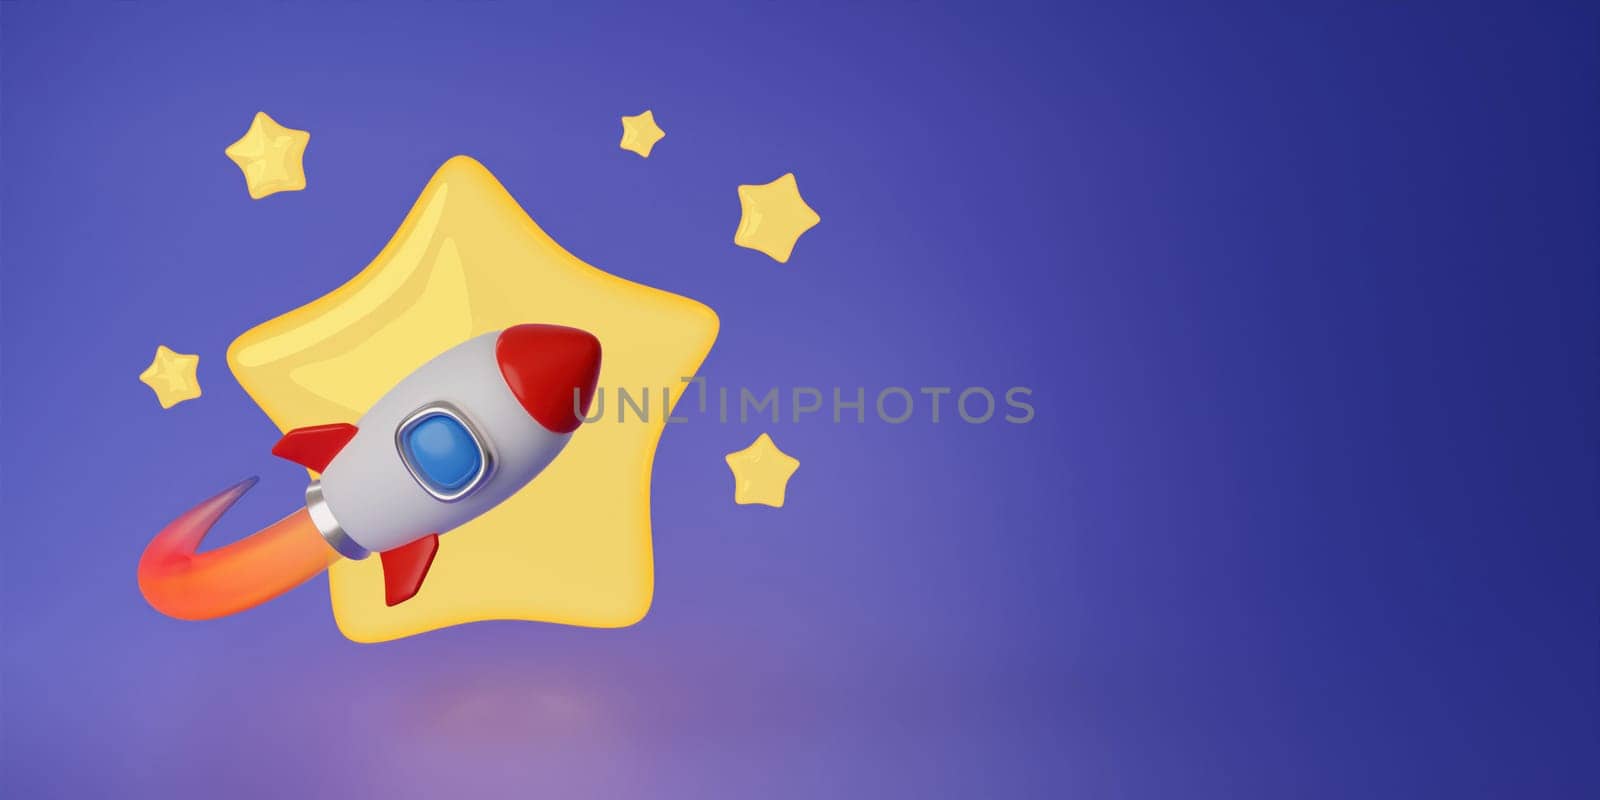 3d Rocket takes off in the starry sky - Space exploring concept. 3d design of Rocket launching on the space mission or tourism in cartoon minimal style. 3d render illustration by meepiangraphic